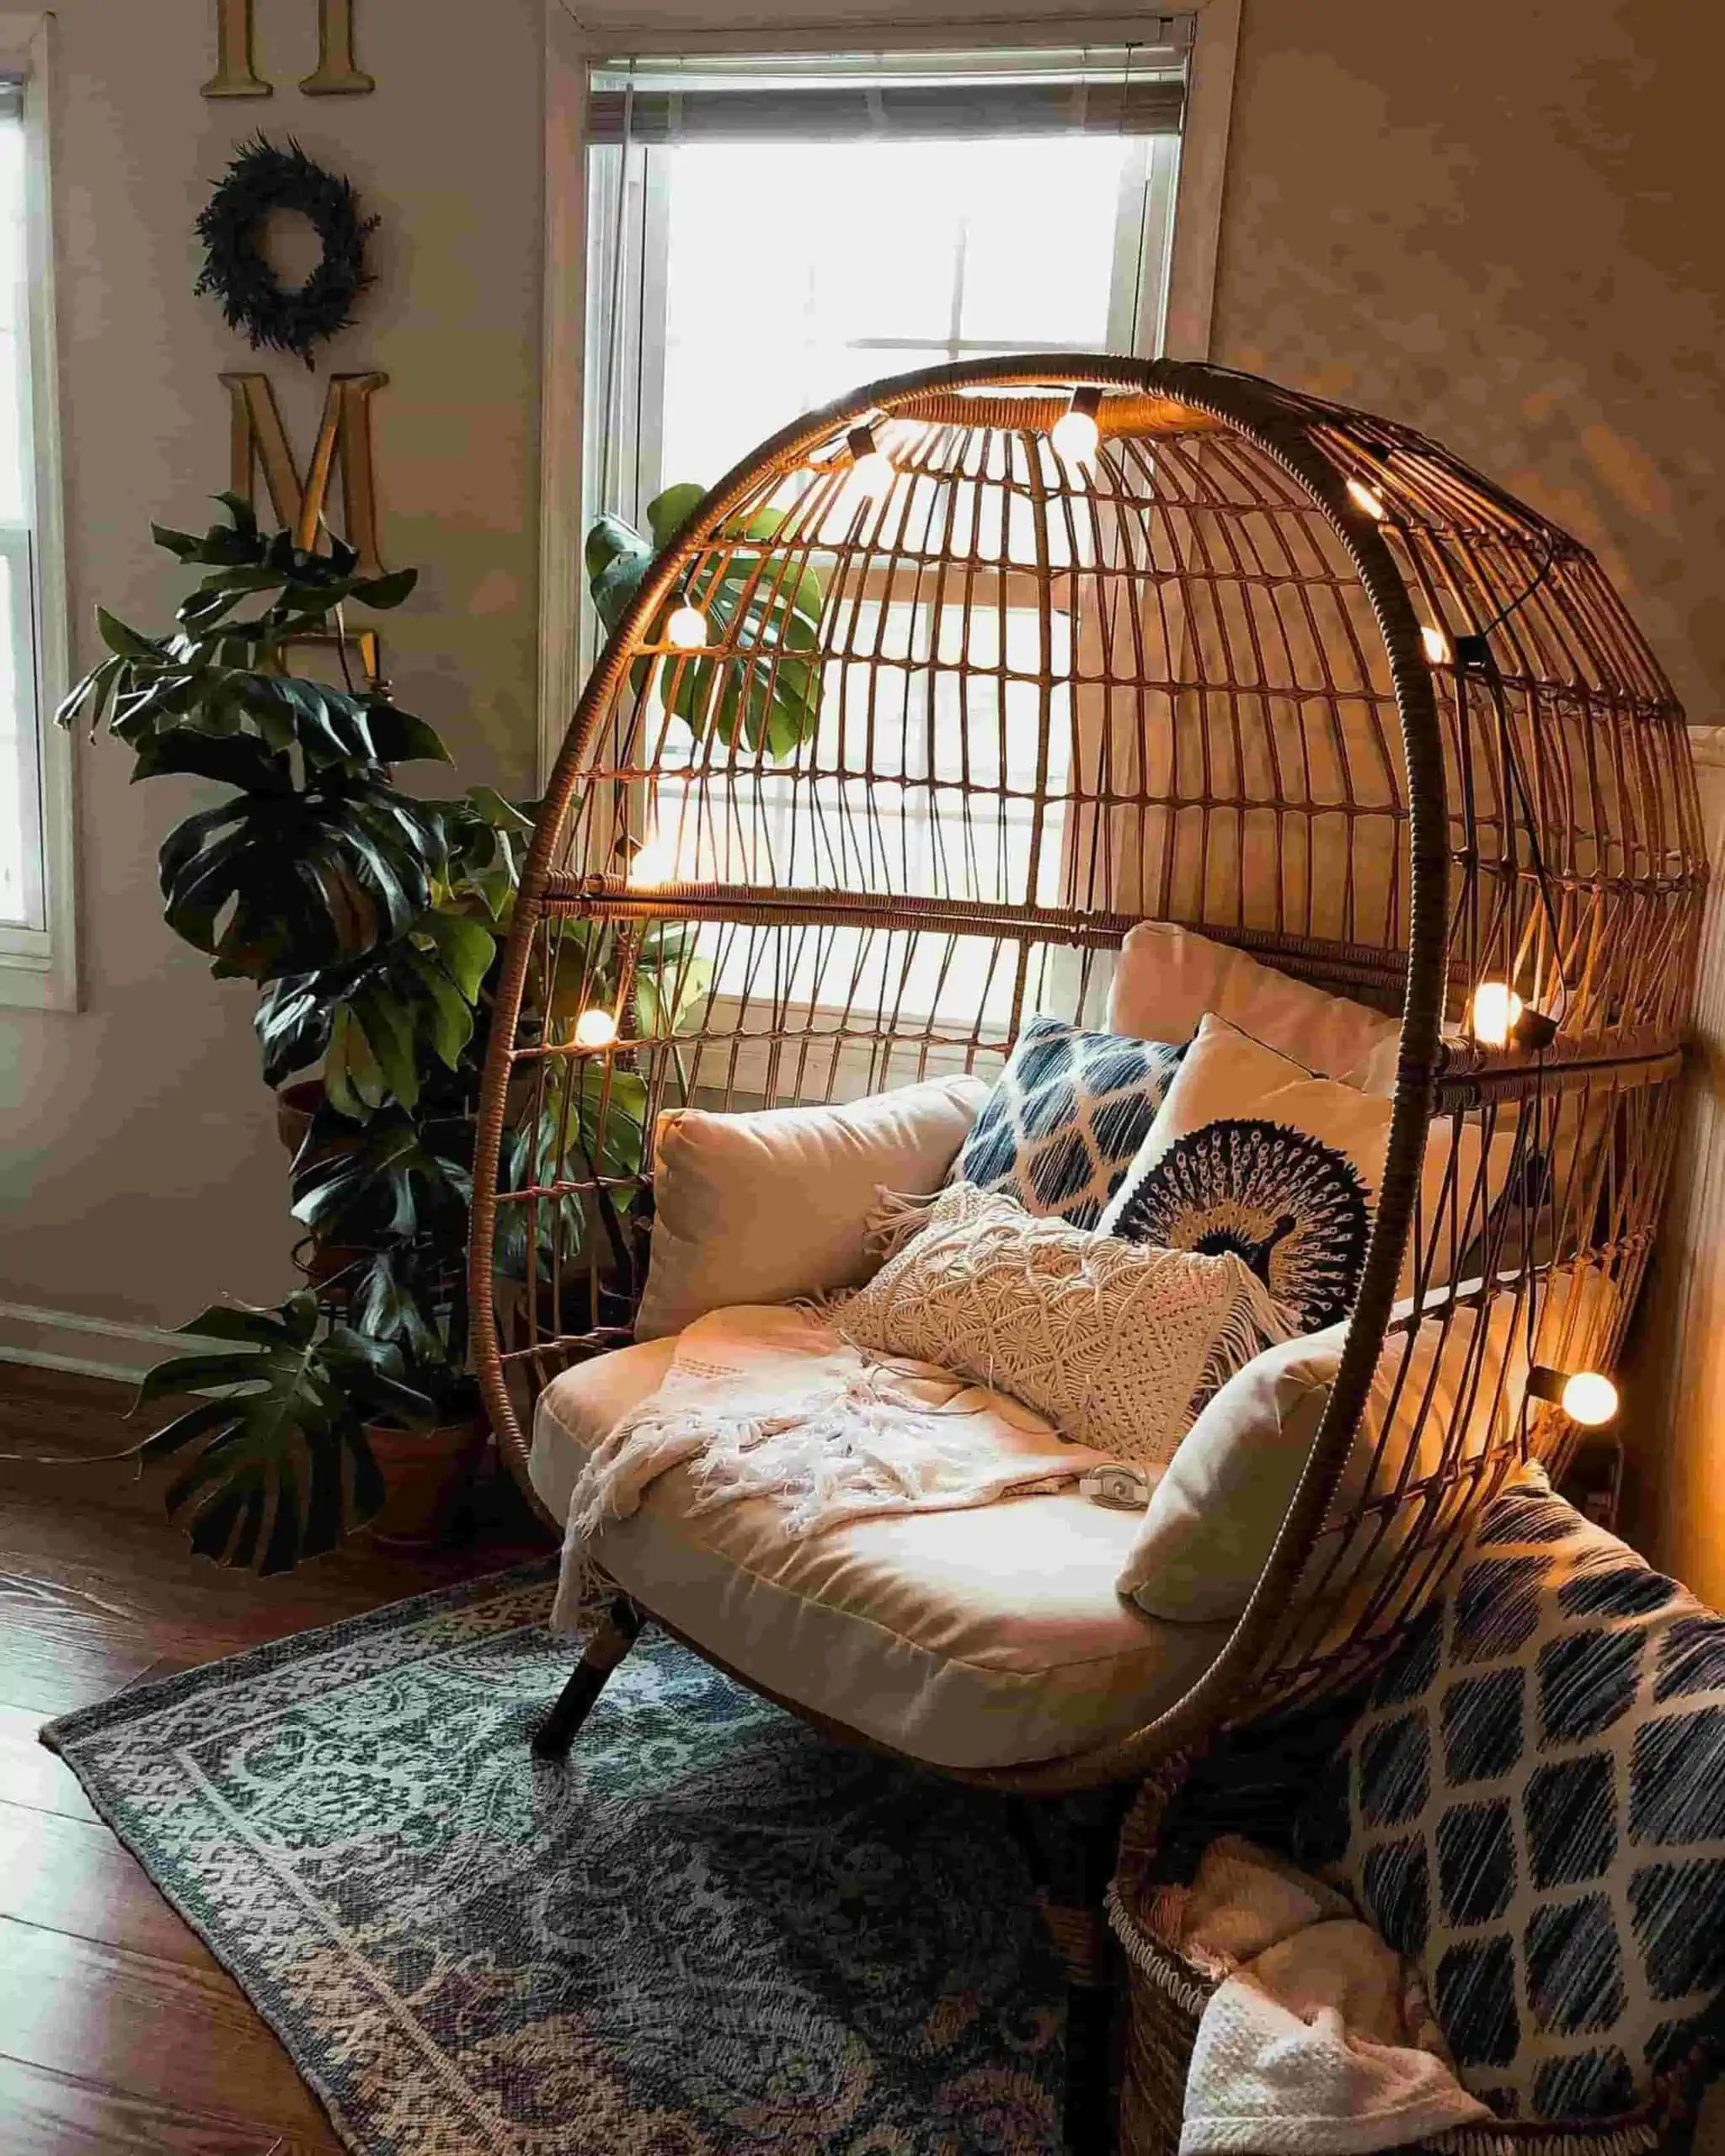 Eccentric egg design with bulb decoration, cushions, house plants and a patterned rug.